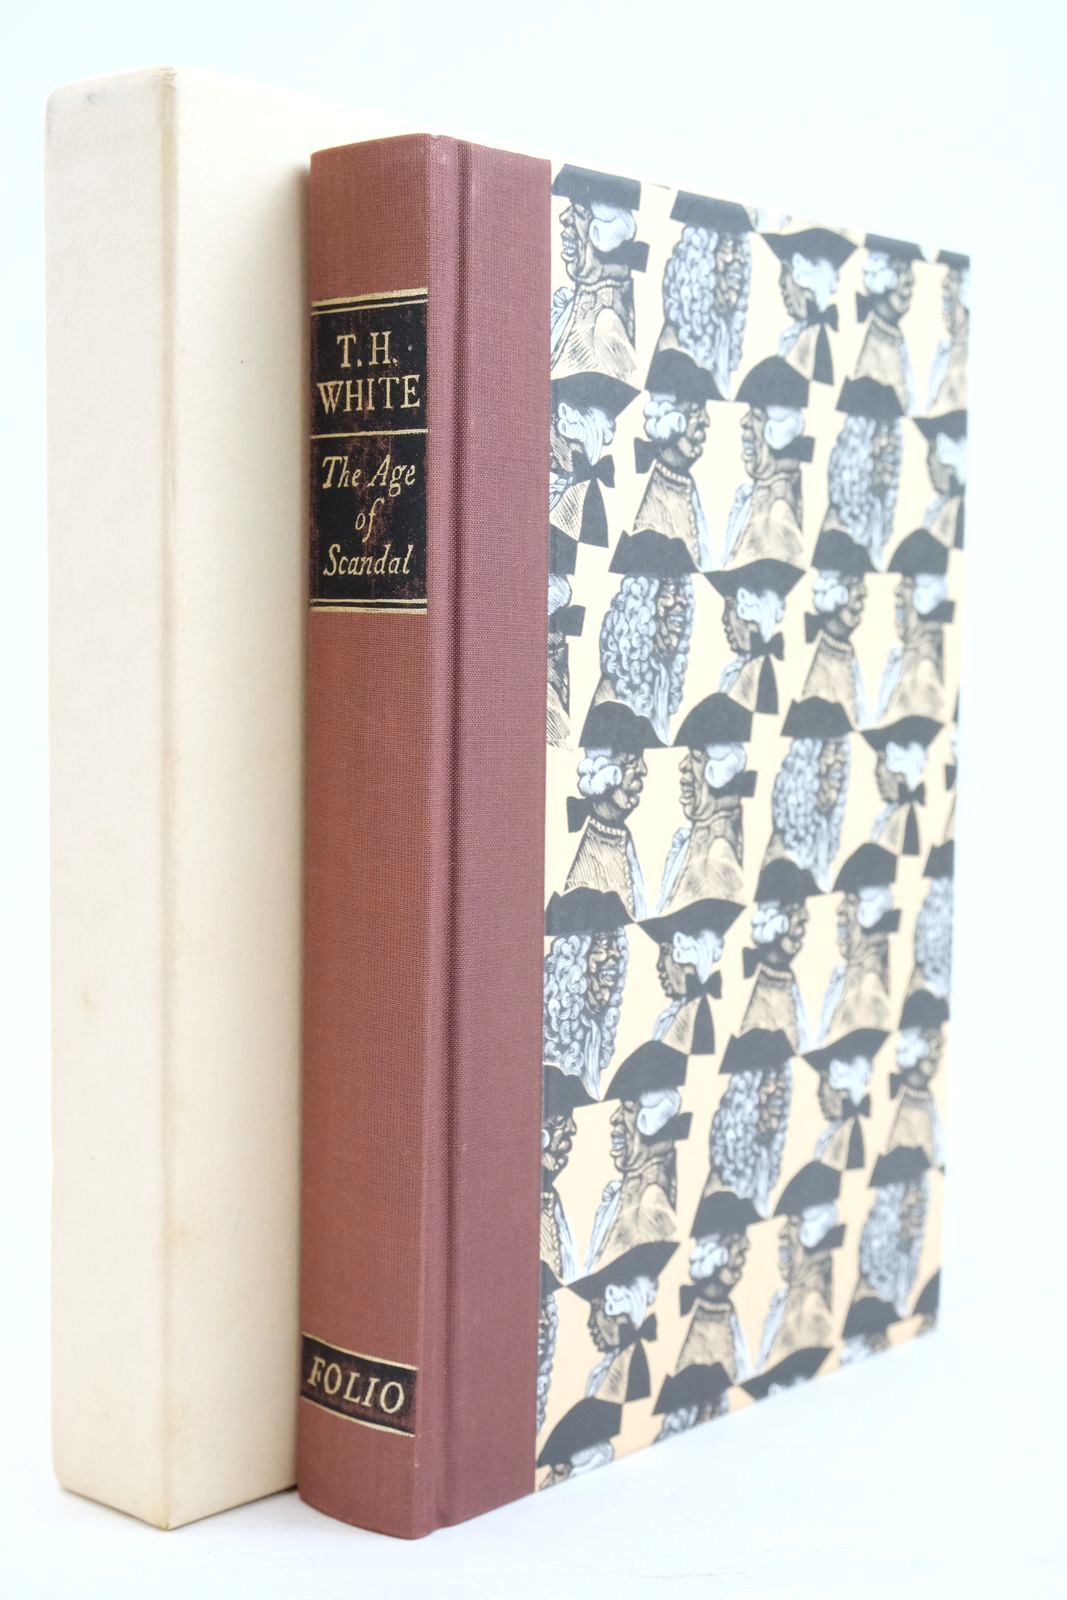 Photo of THE AGE OF SCANDAL: AN EXCURSION THROUGH A MINOR PERIOD written by White, T.H. published by Folio Society (STOCK CODE: 1320886)  for sale by Stella & Rose's Books